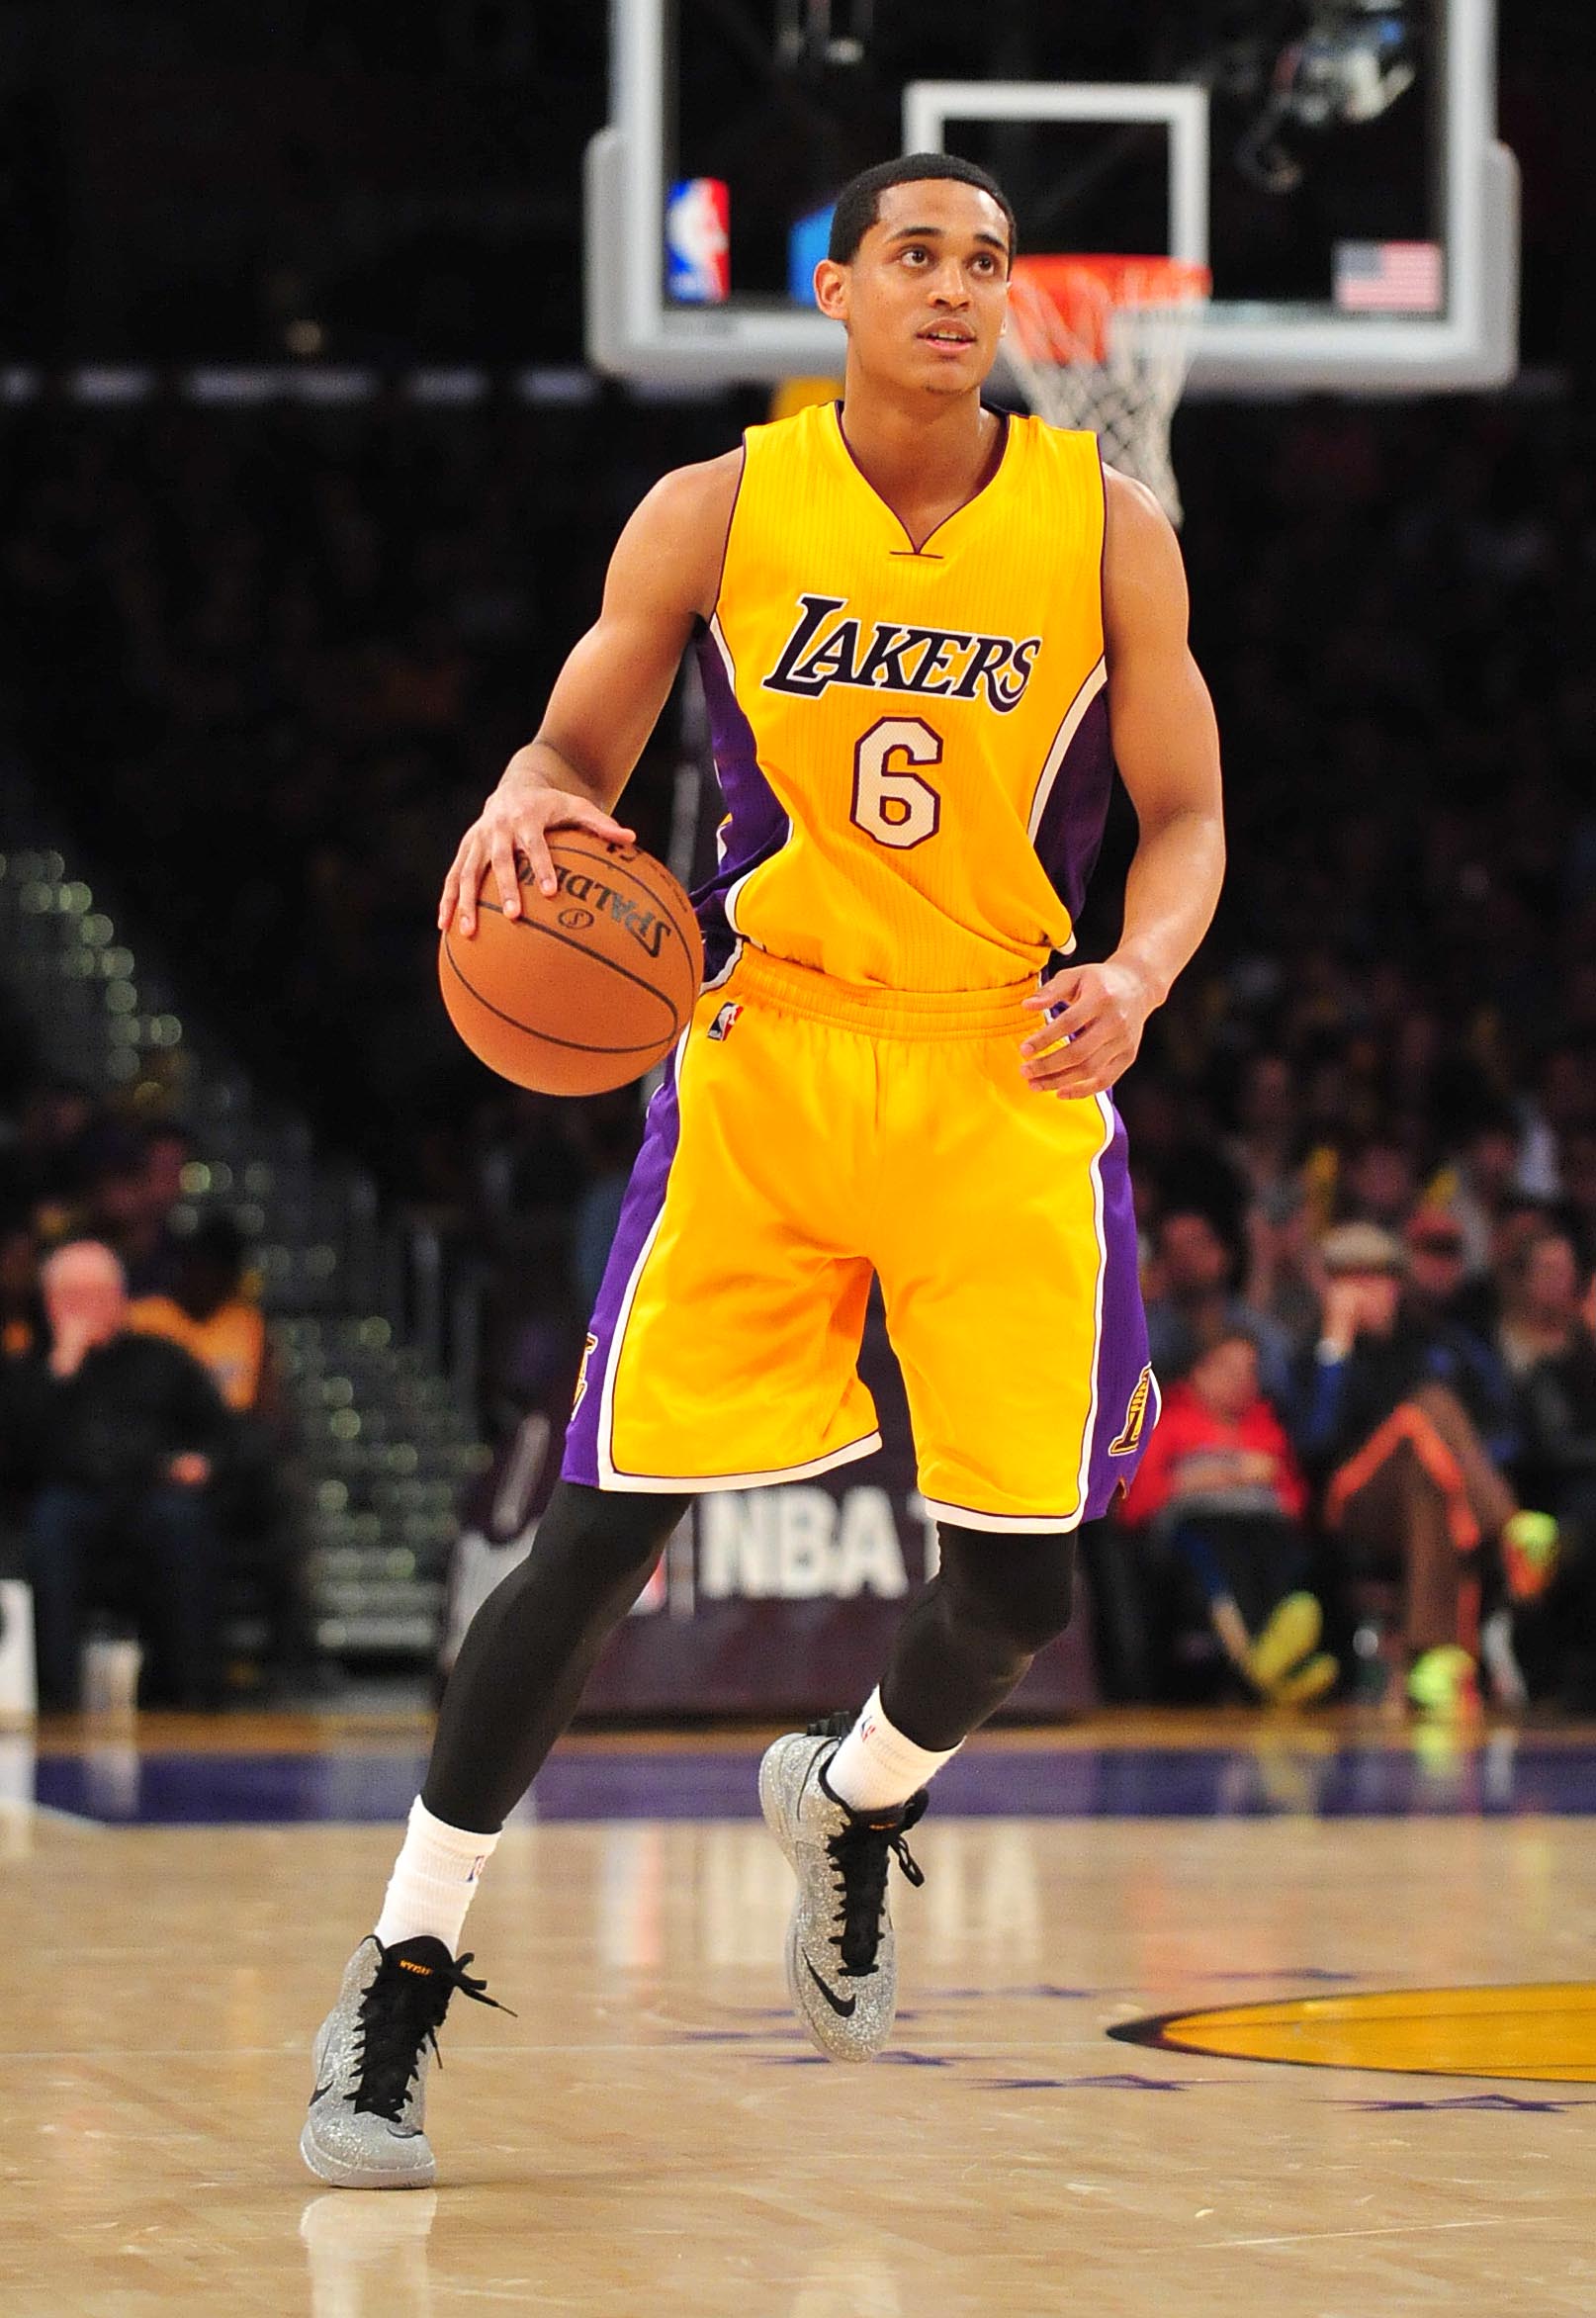 April 3, 2015; Los Angeles, CA, USA; Los Angeles Lakers guard Jordan Clarkson (6) moves the ball up court against the Portland Trail Blazers during the second half at Staples Center. Mandatory Credit: Gary A. Vasquez-USA TODAY Sports